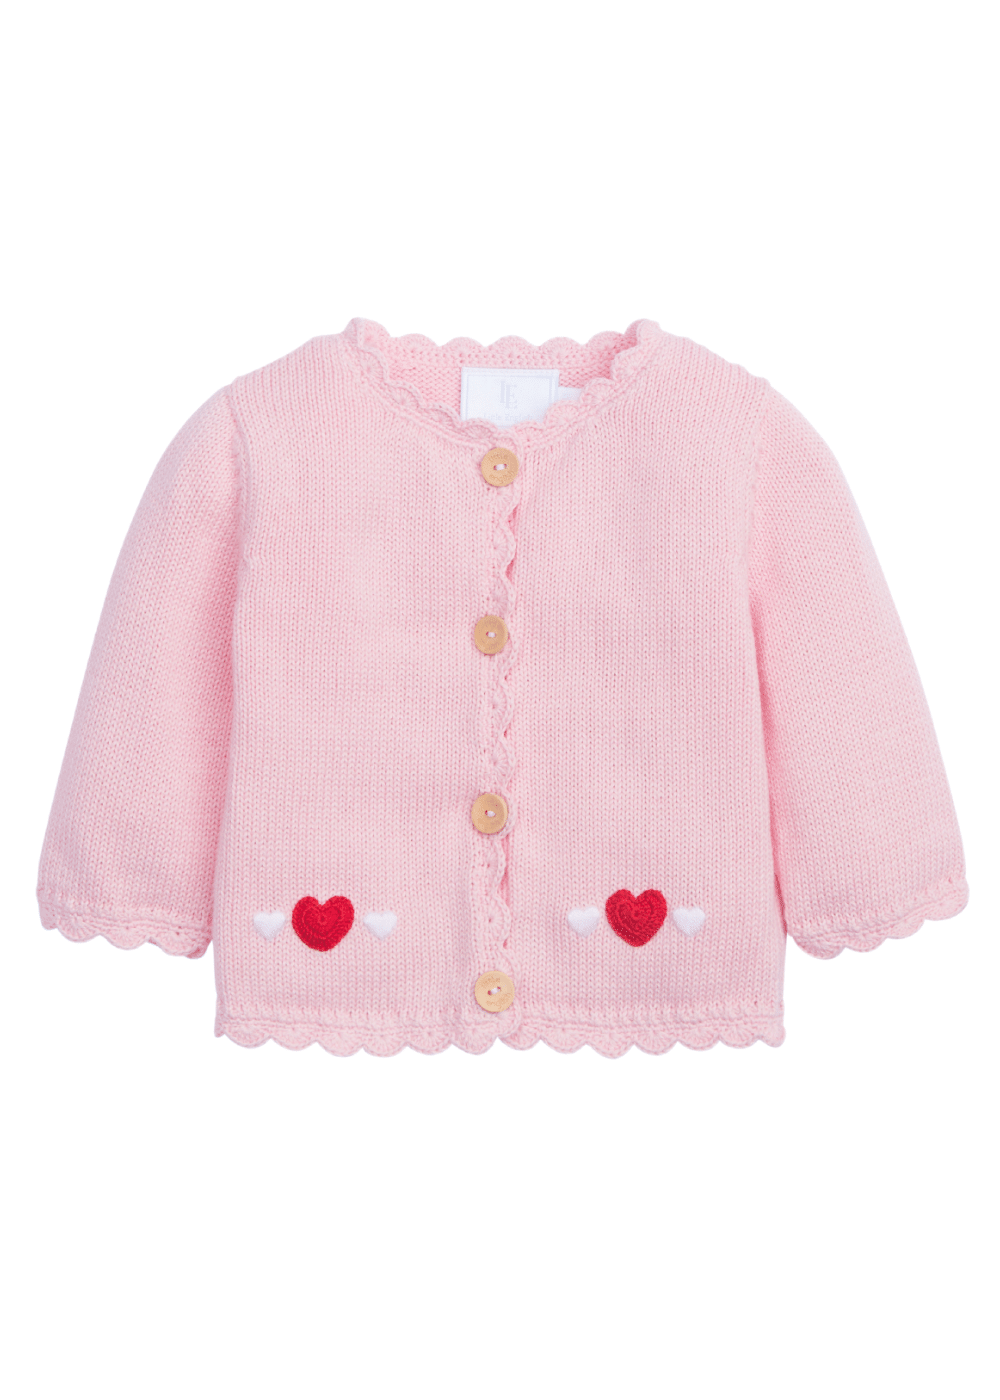 seguridadindustrialcr classic pink crochet cardigan for little girls with red hearts for Valentine's Day